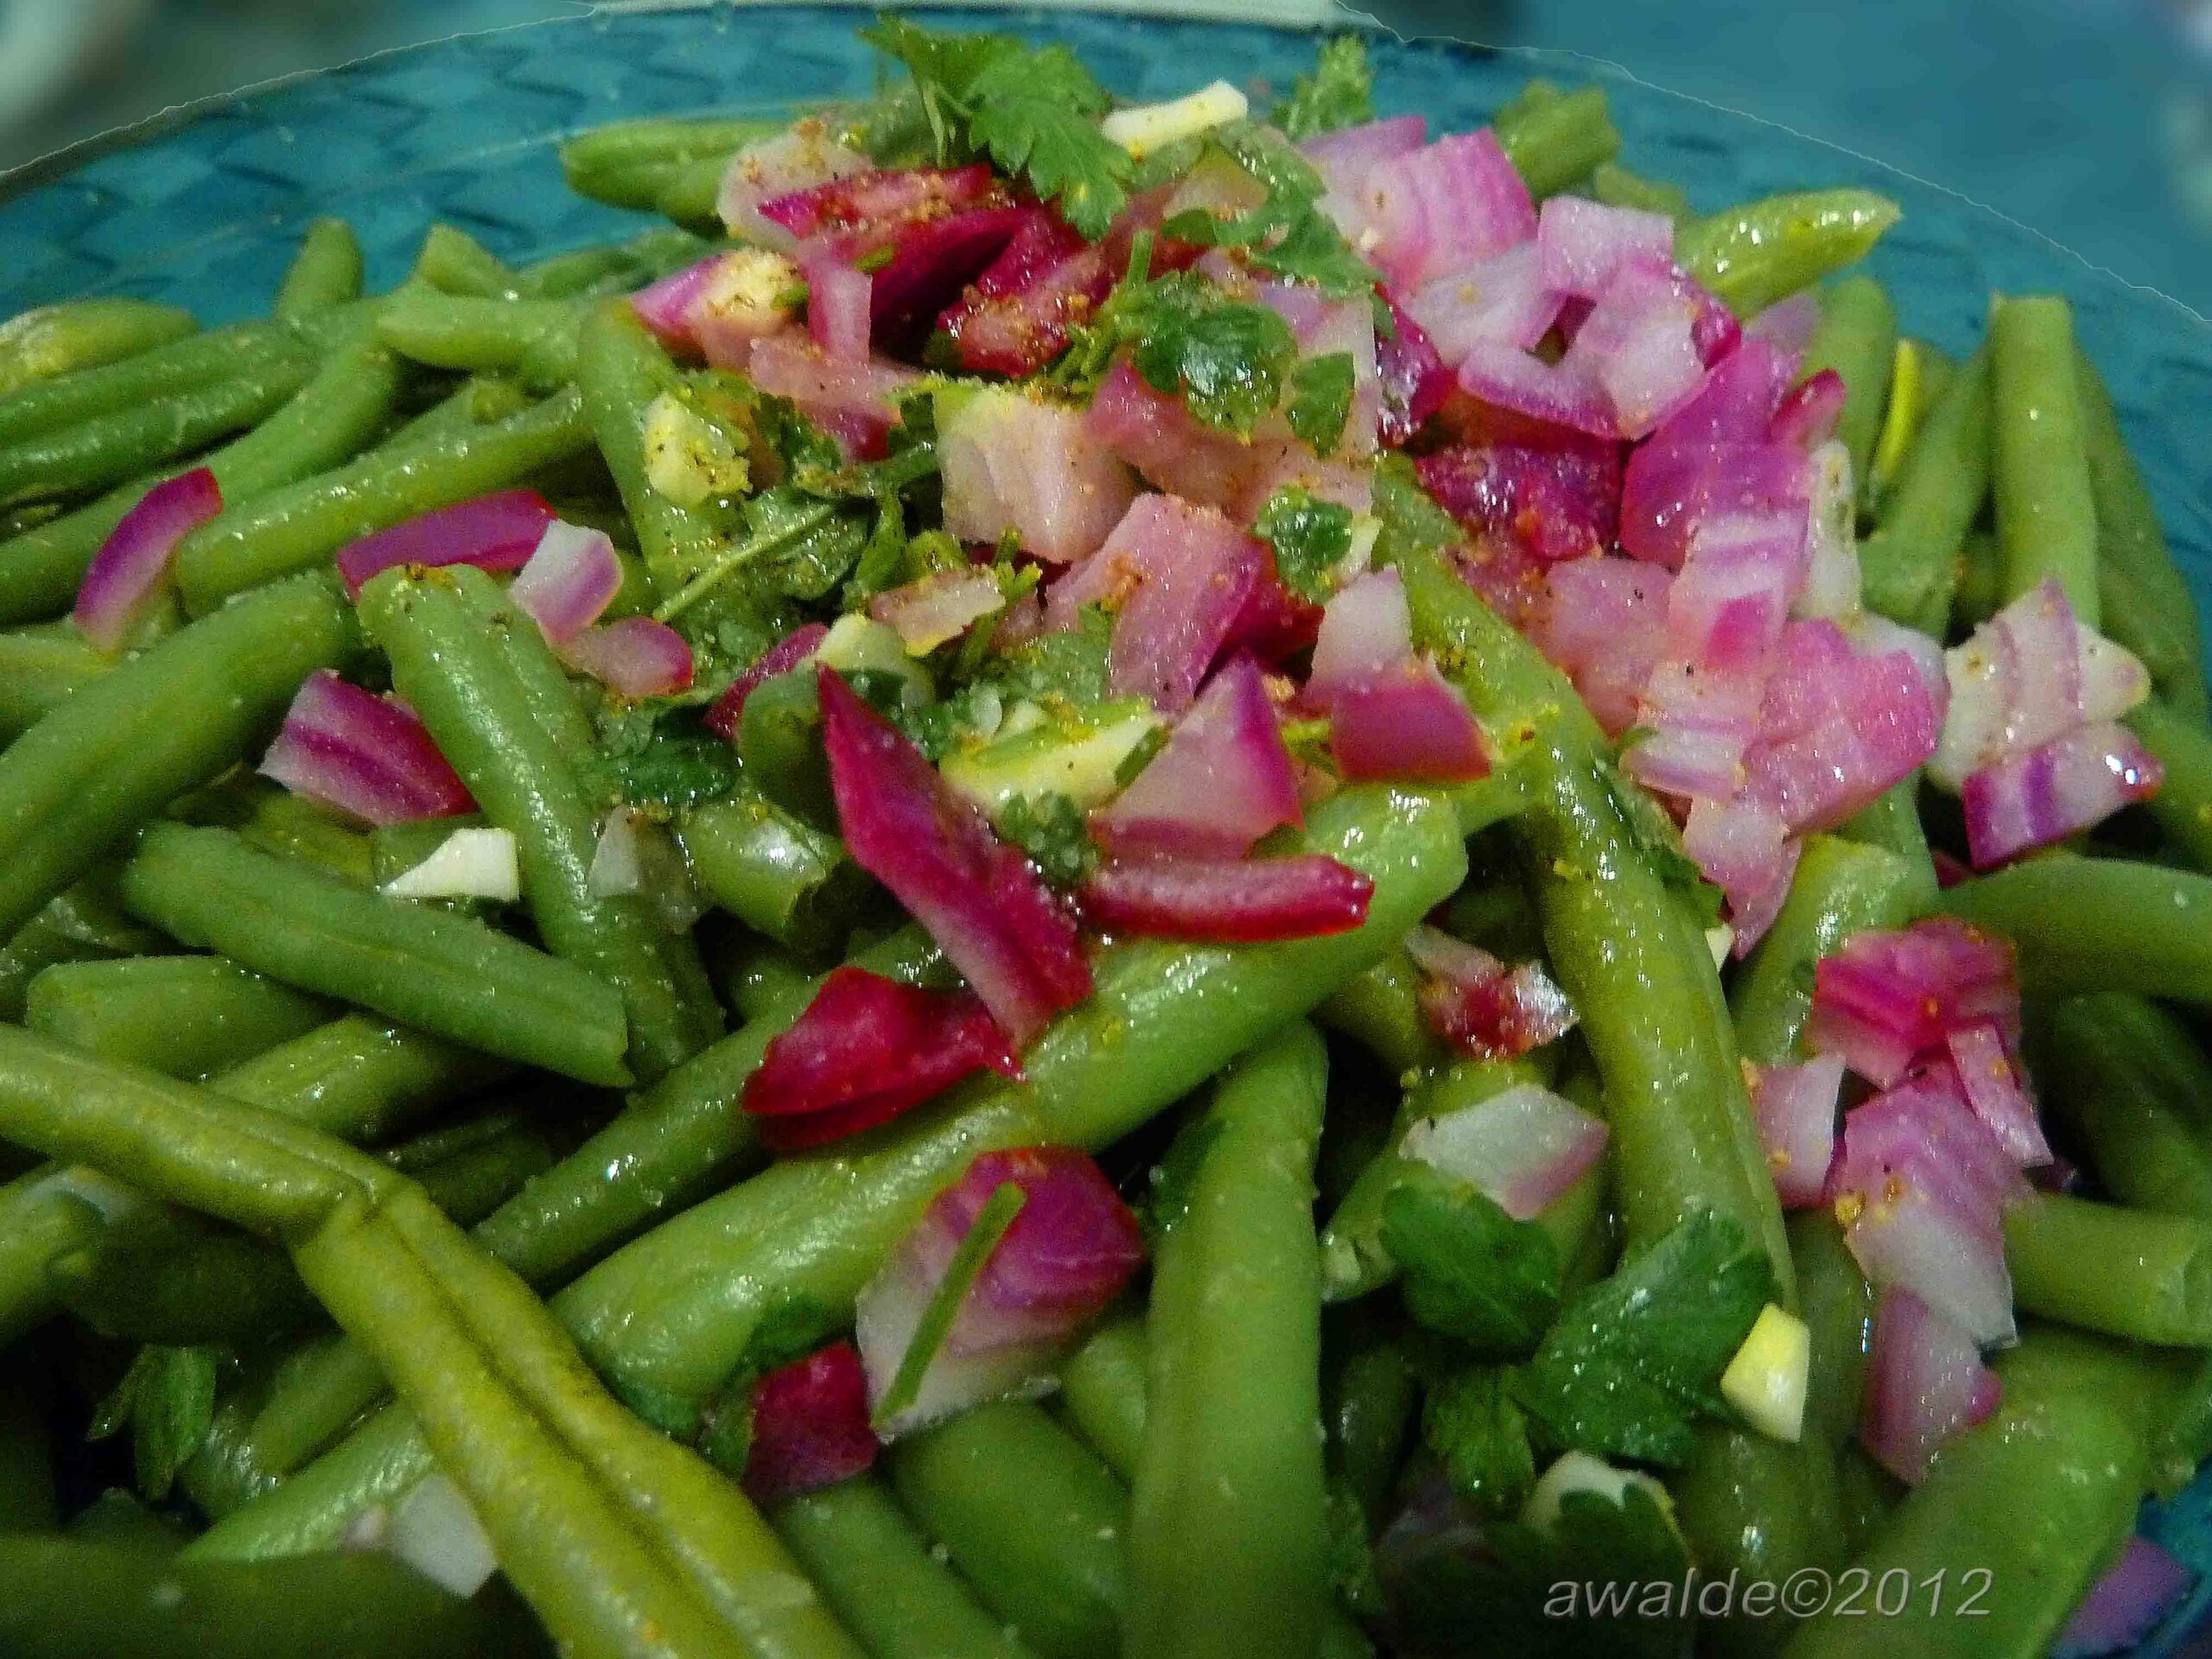  A colorful and flavorful way to enjoy your veggies!